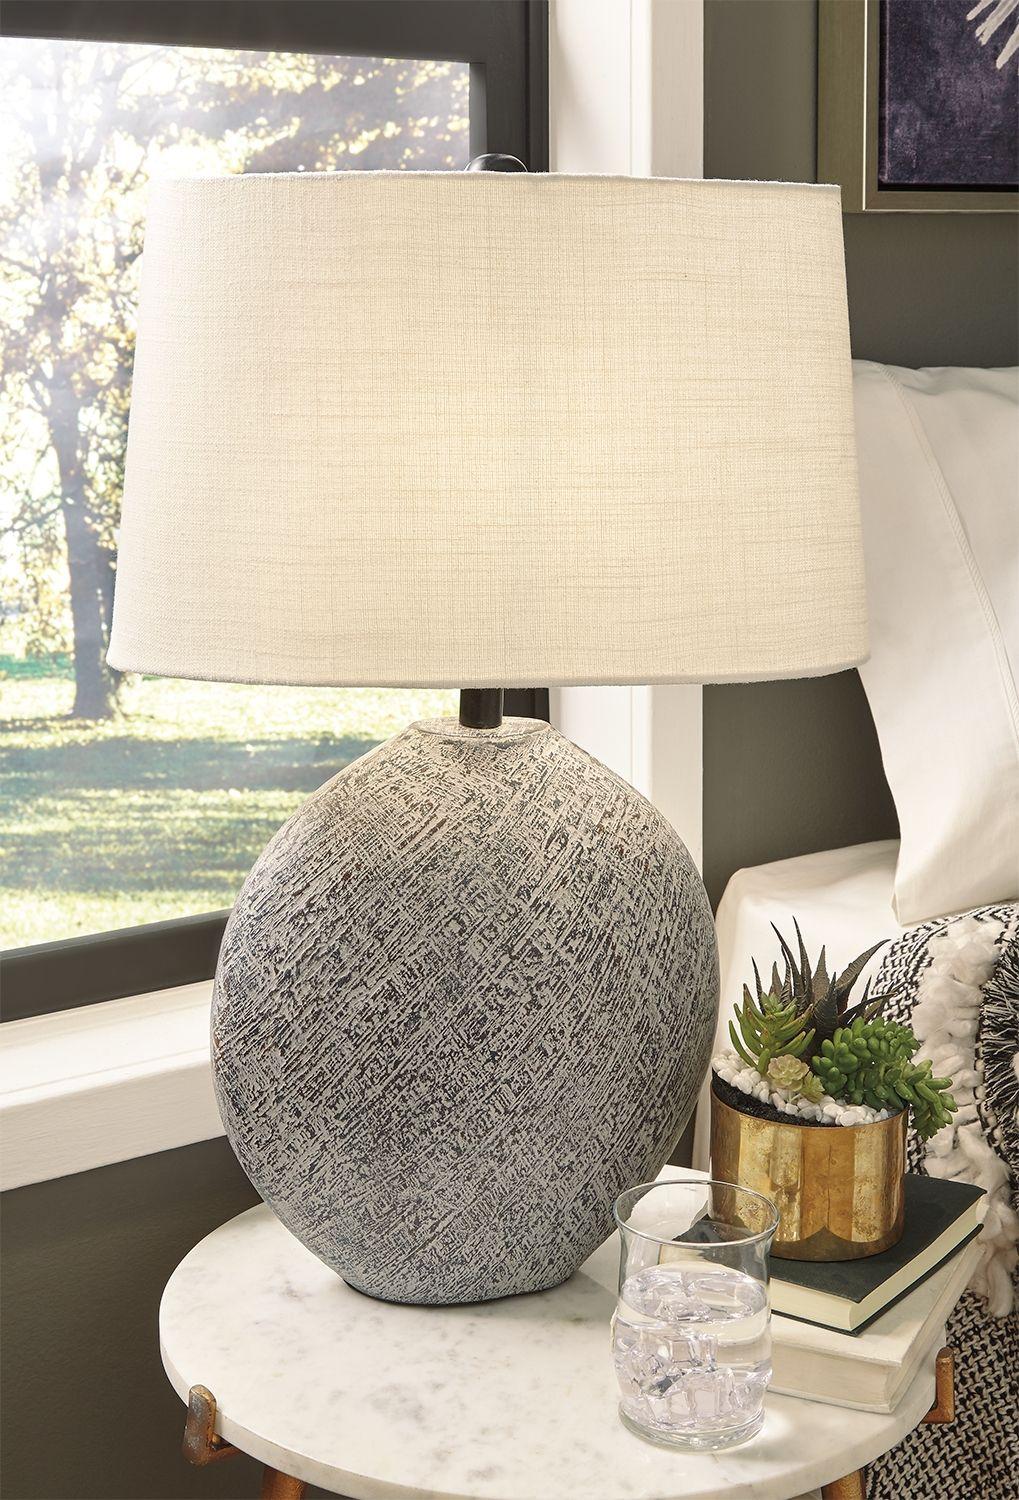 Blue/Gray Round Table Lamp